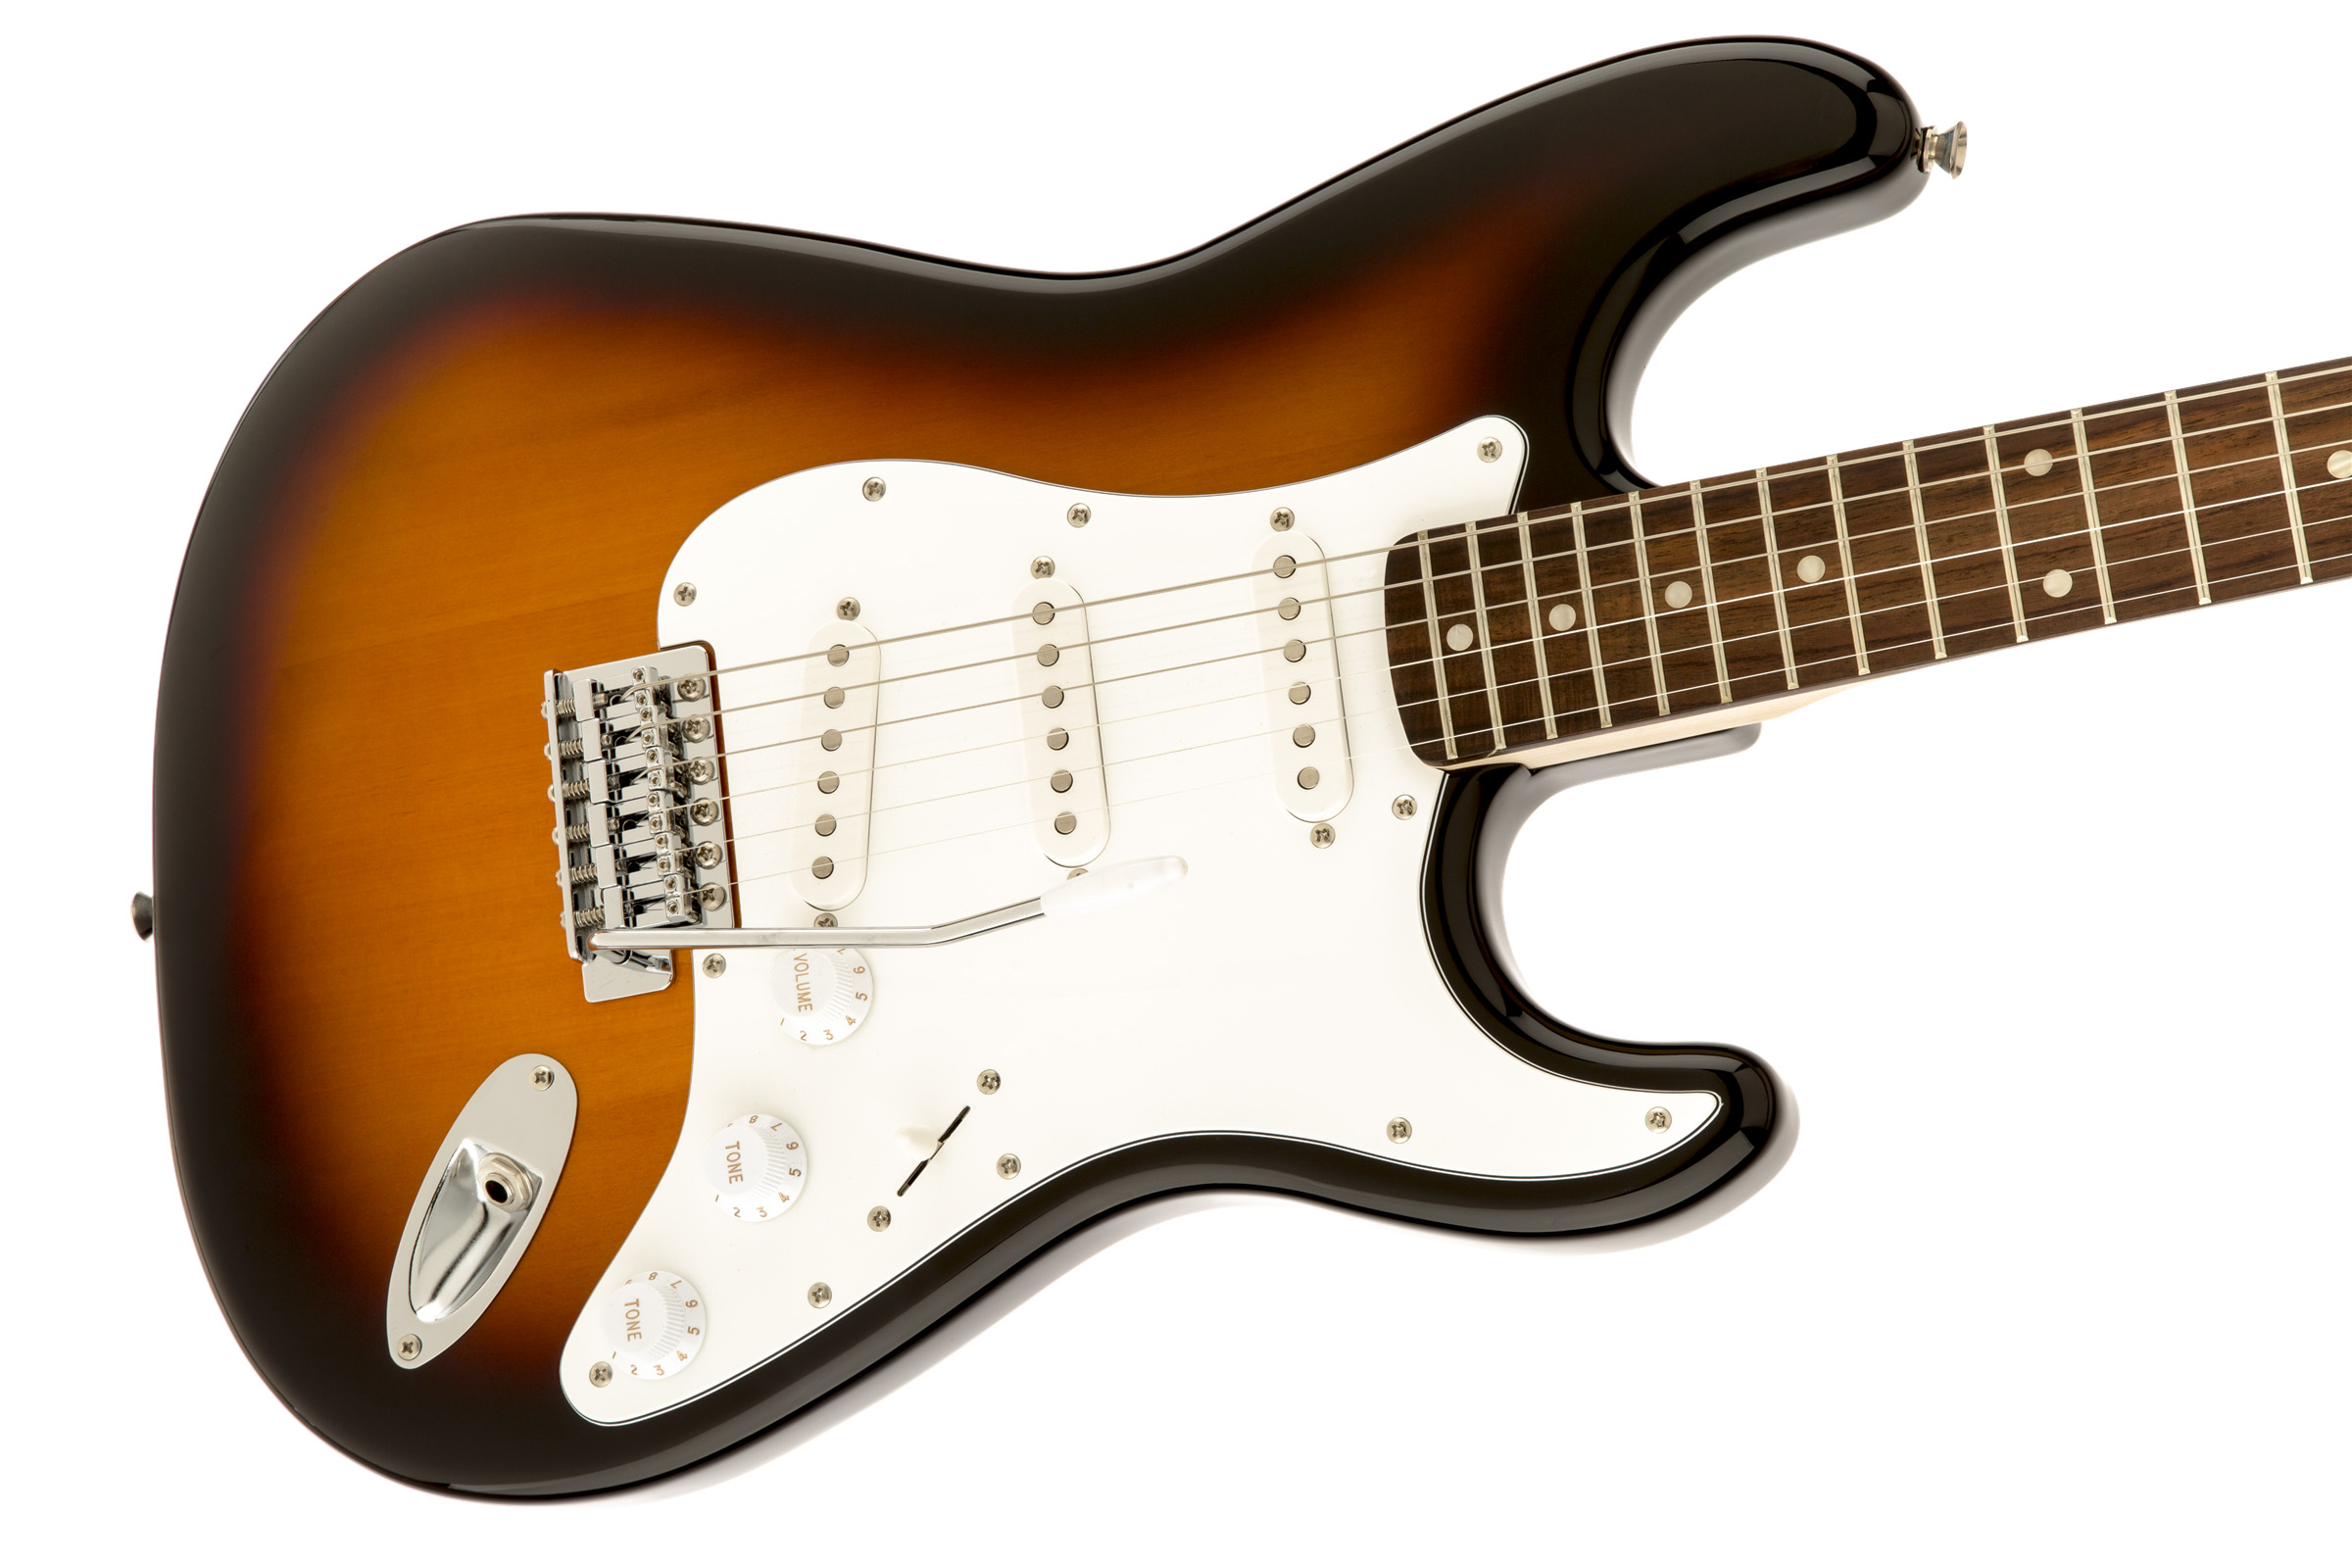 Squier stratocaster hss. Электрогитара Fender American Original '50s Stratocaster. Электрогитара Fender Squier Bullet Stratocaster. Fender Player Strat HSS MN 3ts электрогитара, цвет санберст. Электрогитара Squier Affinity Stratocaster.